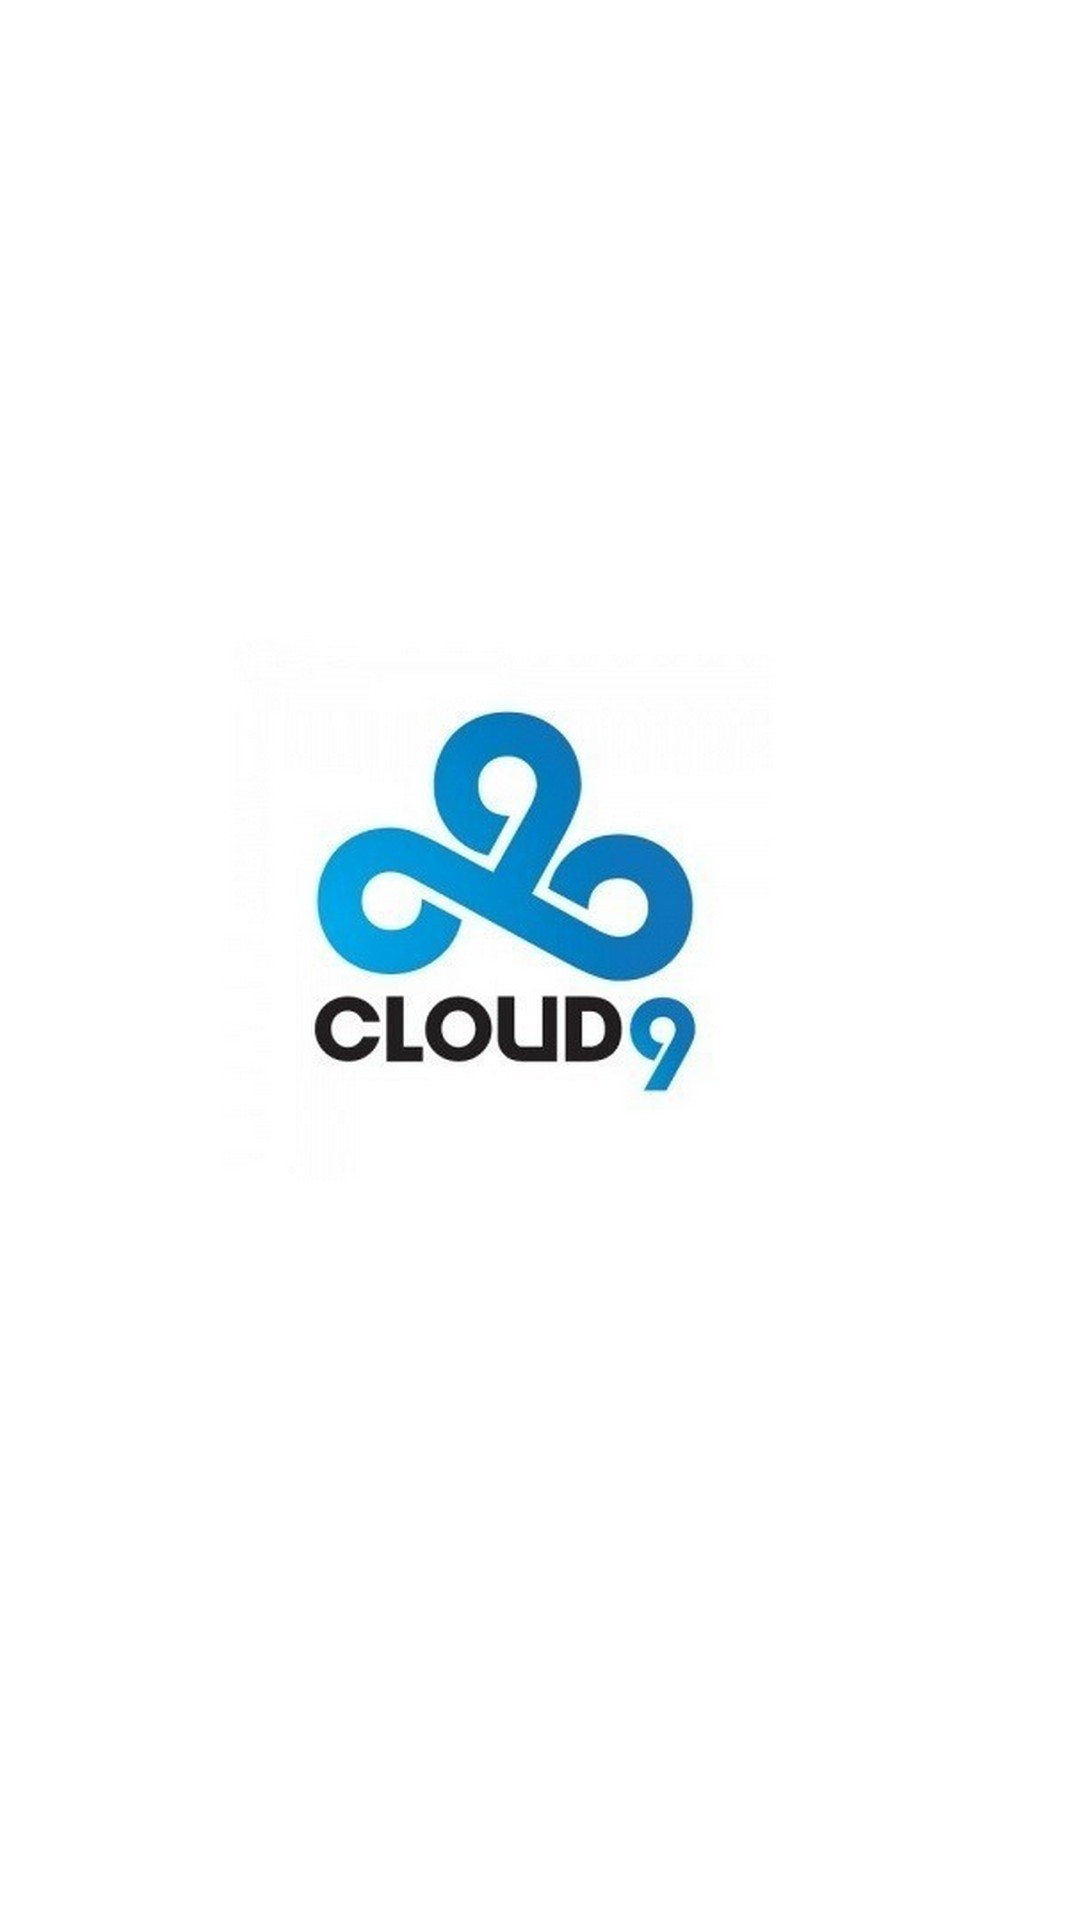 Wallpapers Cloud 9 Games resolution 1080x1920